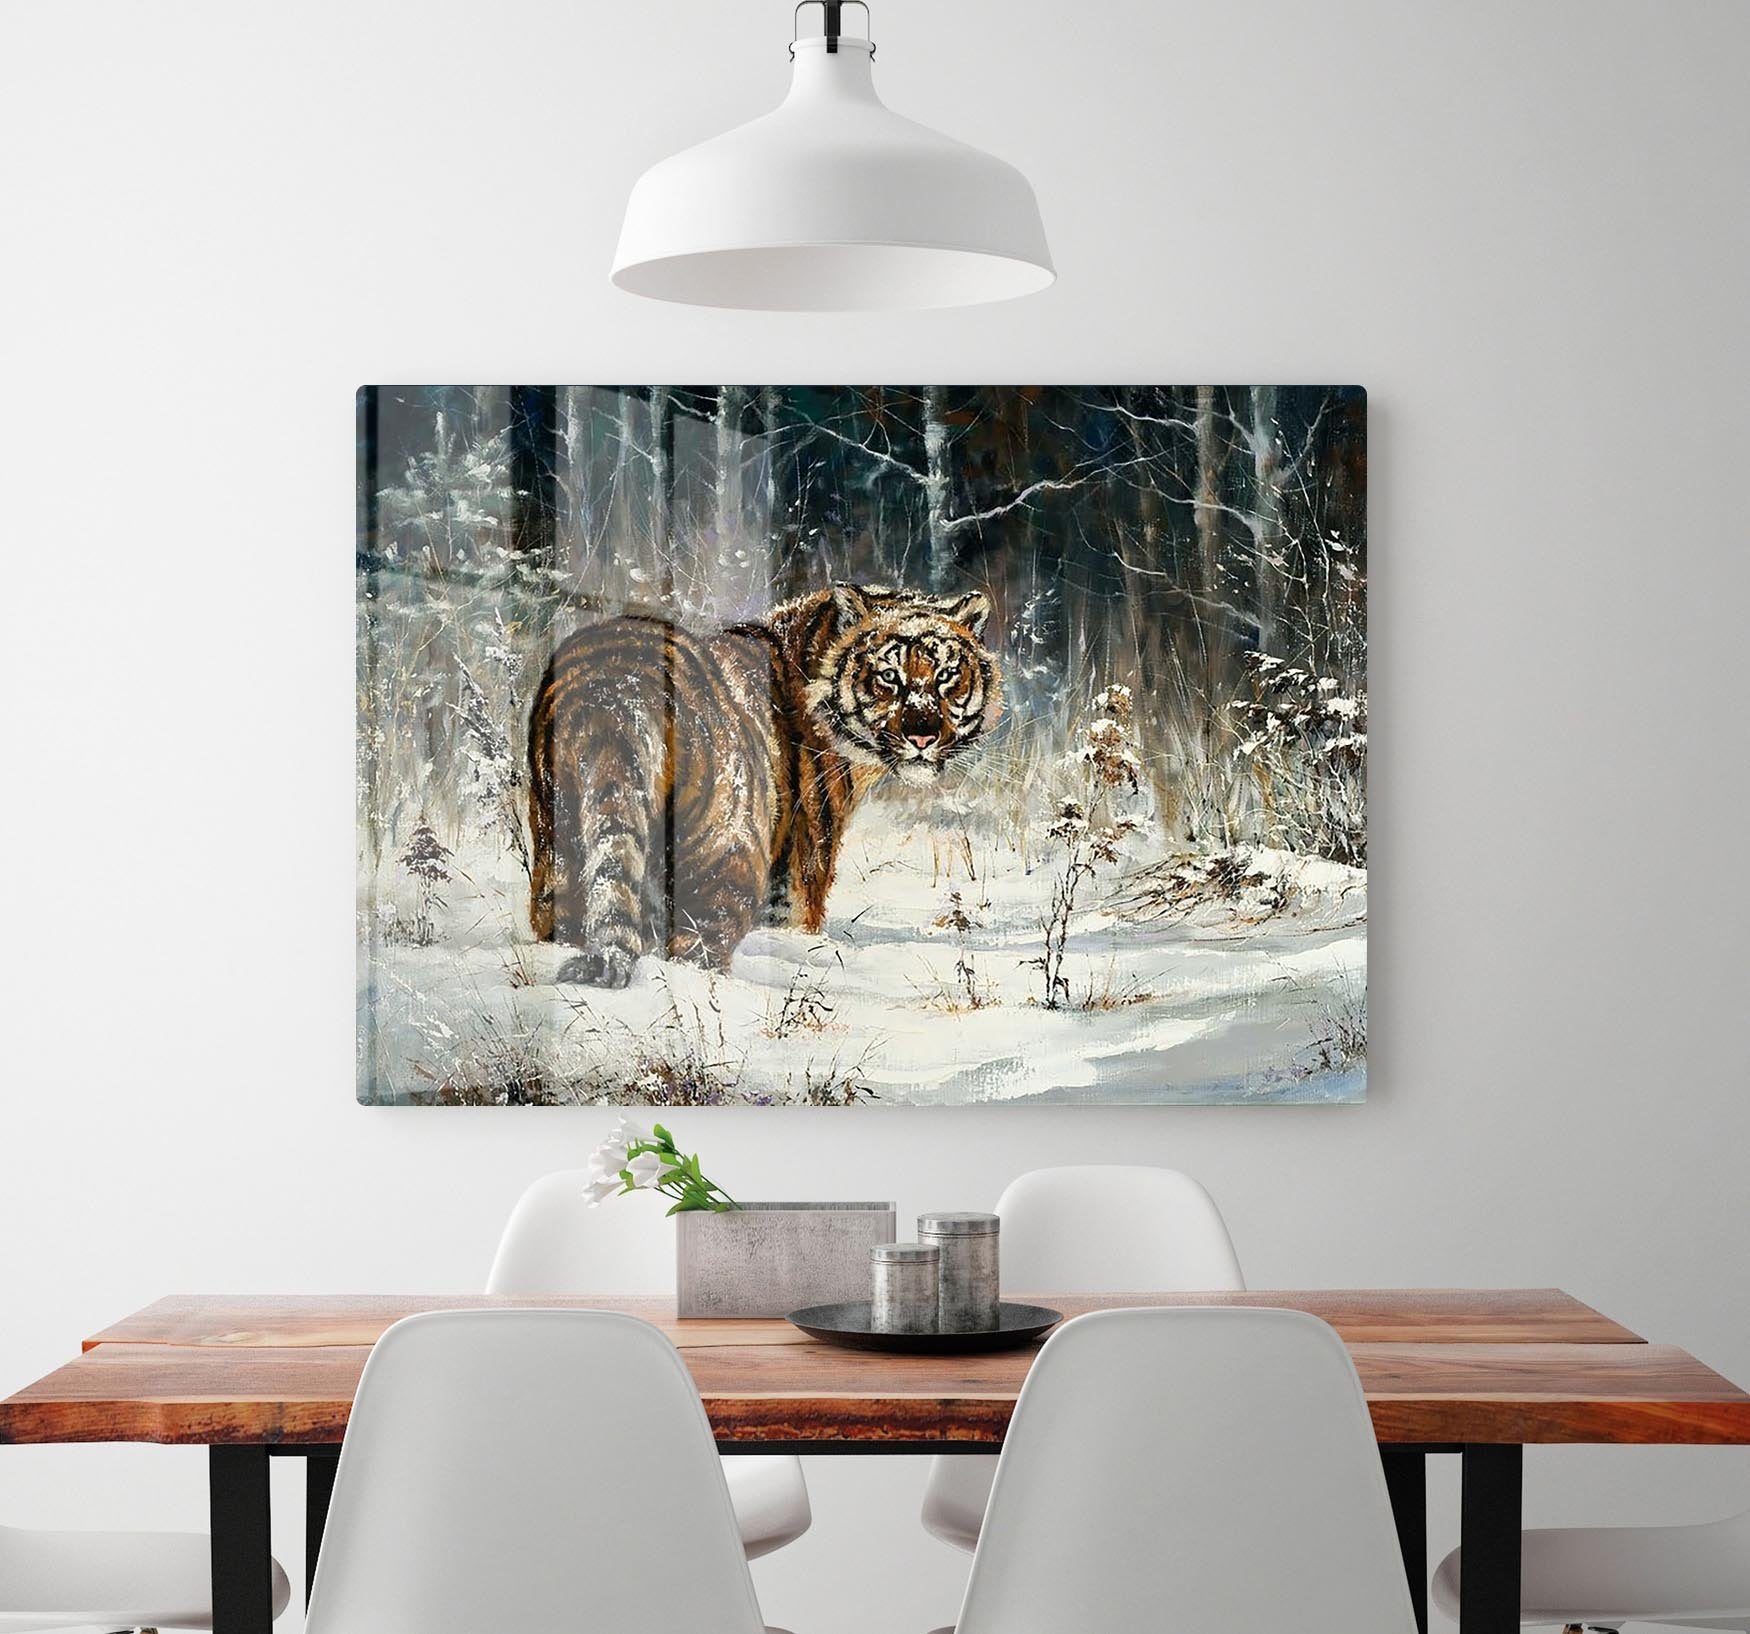 Landscape with a tiger in winter wood HD Metal Print - Canvas Art Rocks - 2